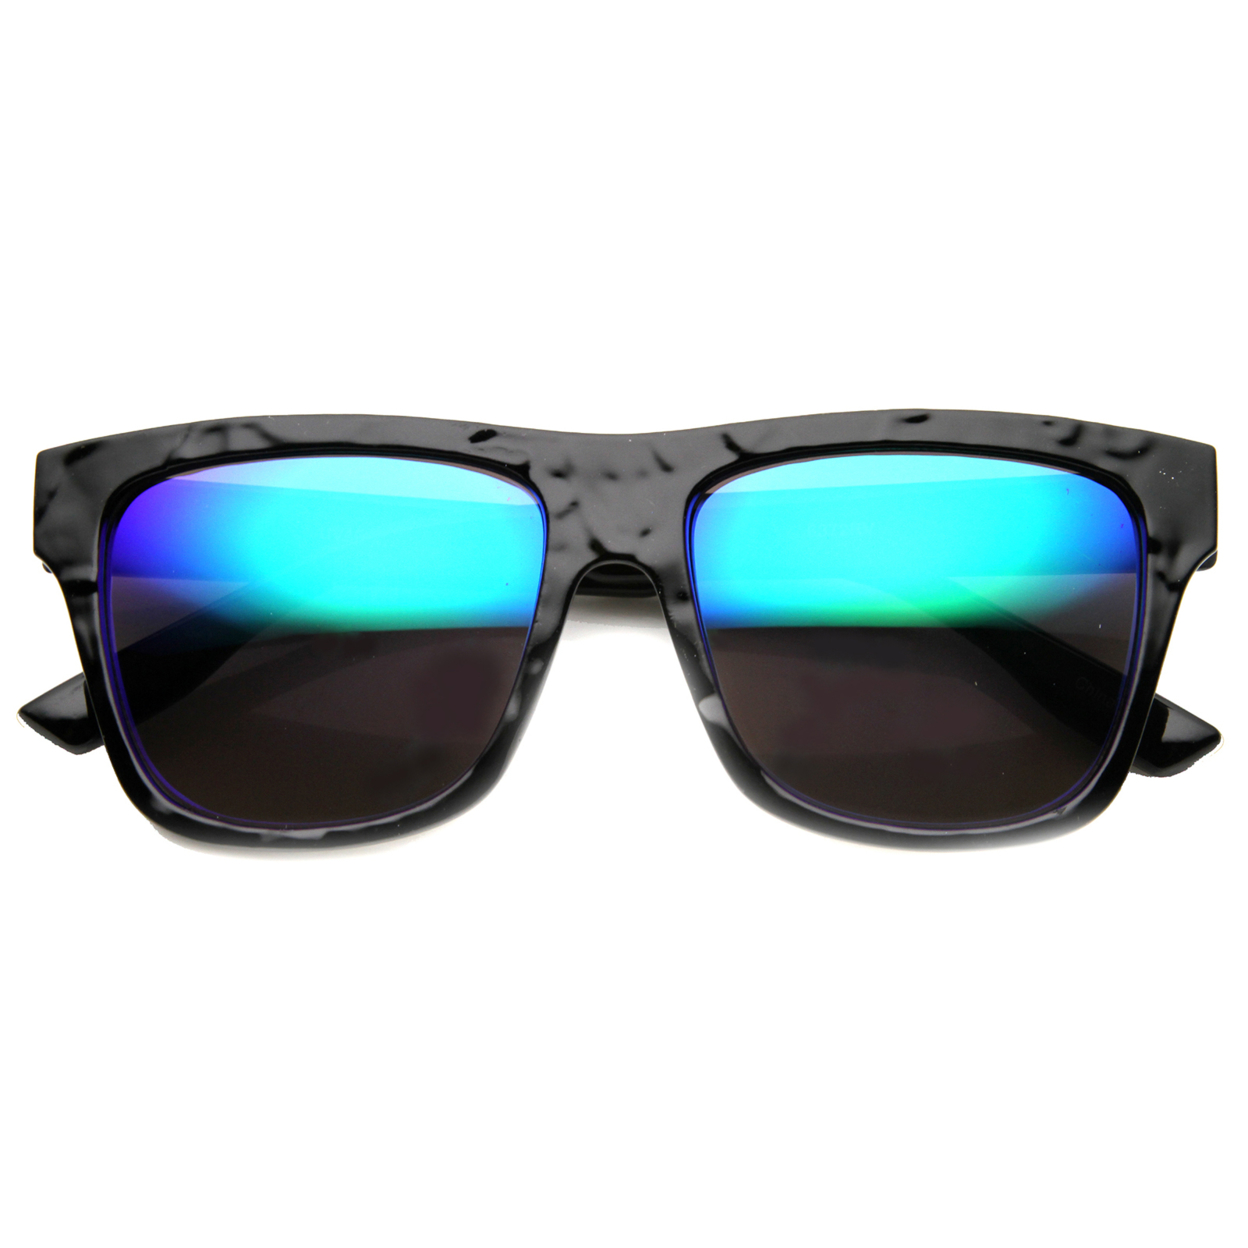 Unisex Horn Rimmed Sunglasses With UV400 Protected Mirrored Lens 9864 - Shiny-Black / Fire